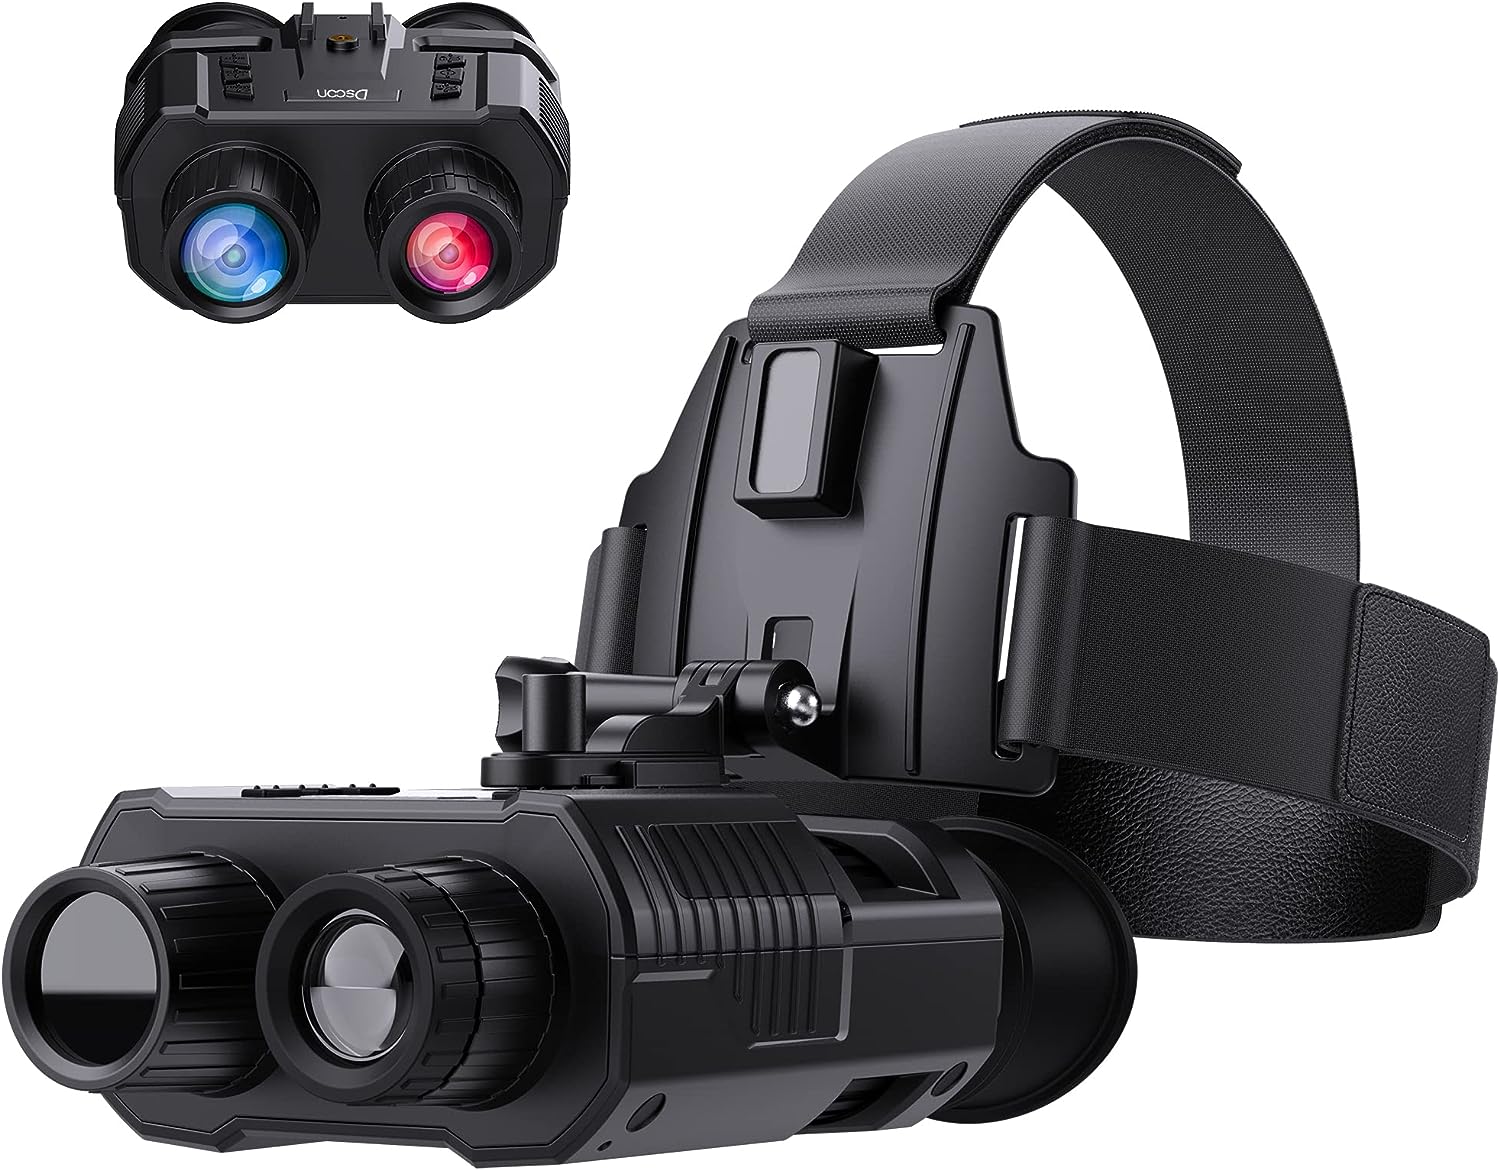 Dsoon Night Vision Goggles, Night Vision Binoculars, Digital Infrared Goggles with Screen for Viewing 984ft/300m in 100% Darkness,FHD 4K Video for Hunting  Surveillance